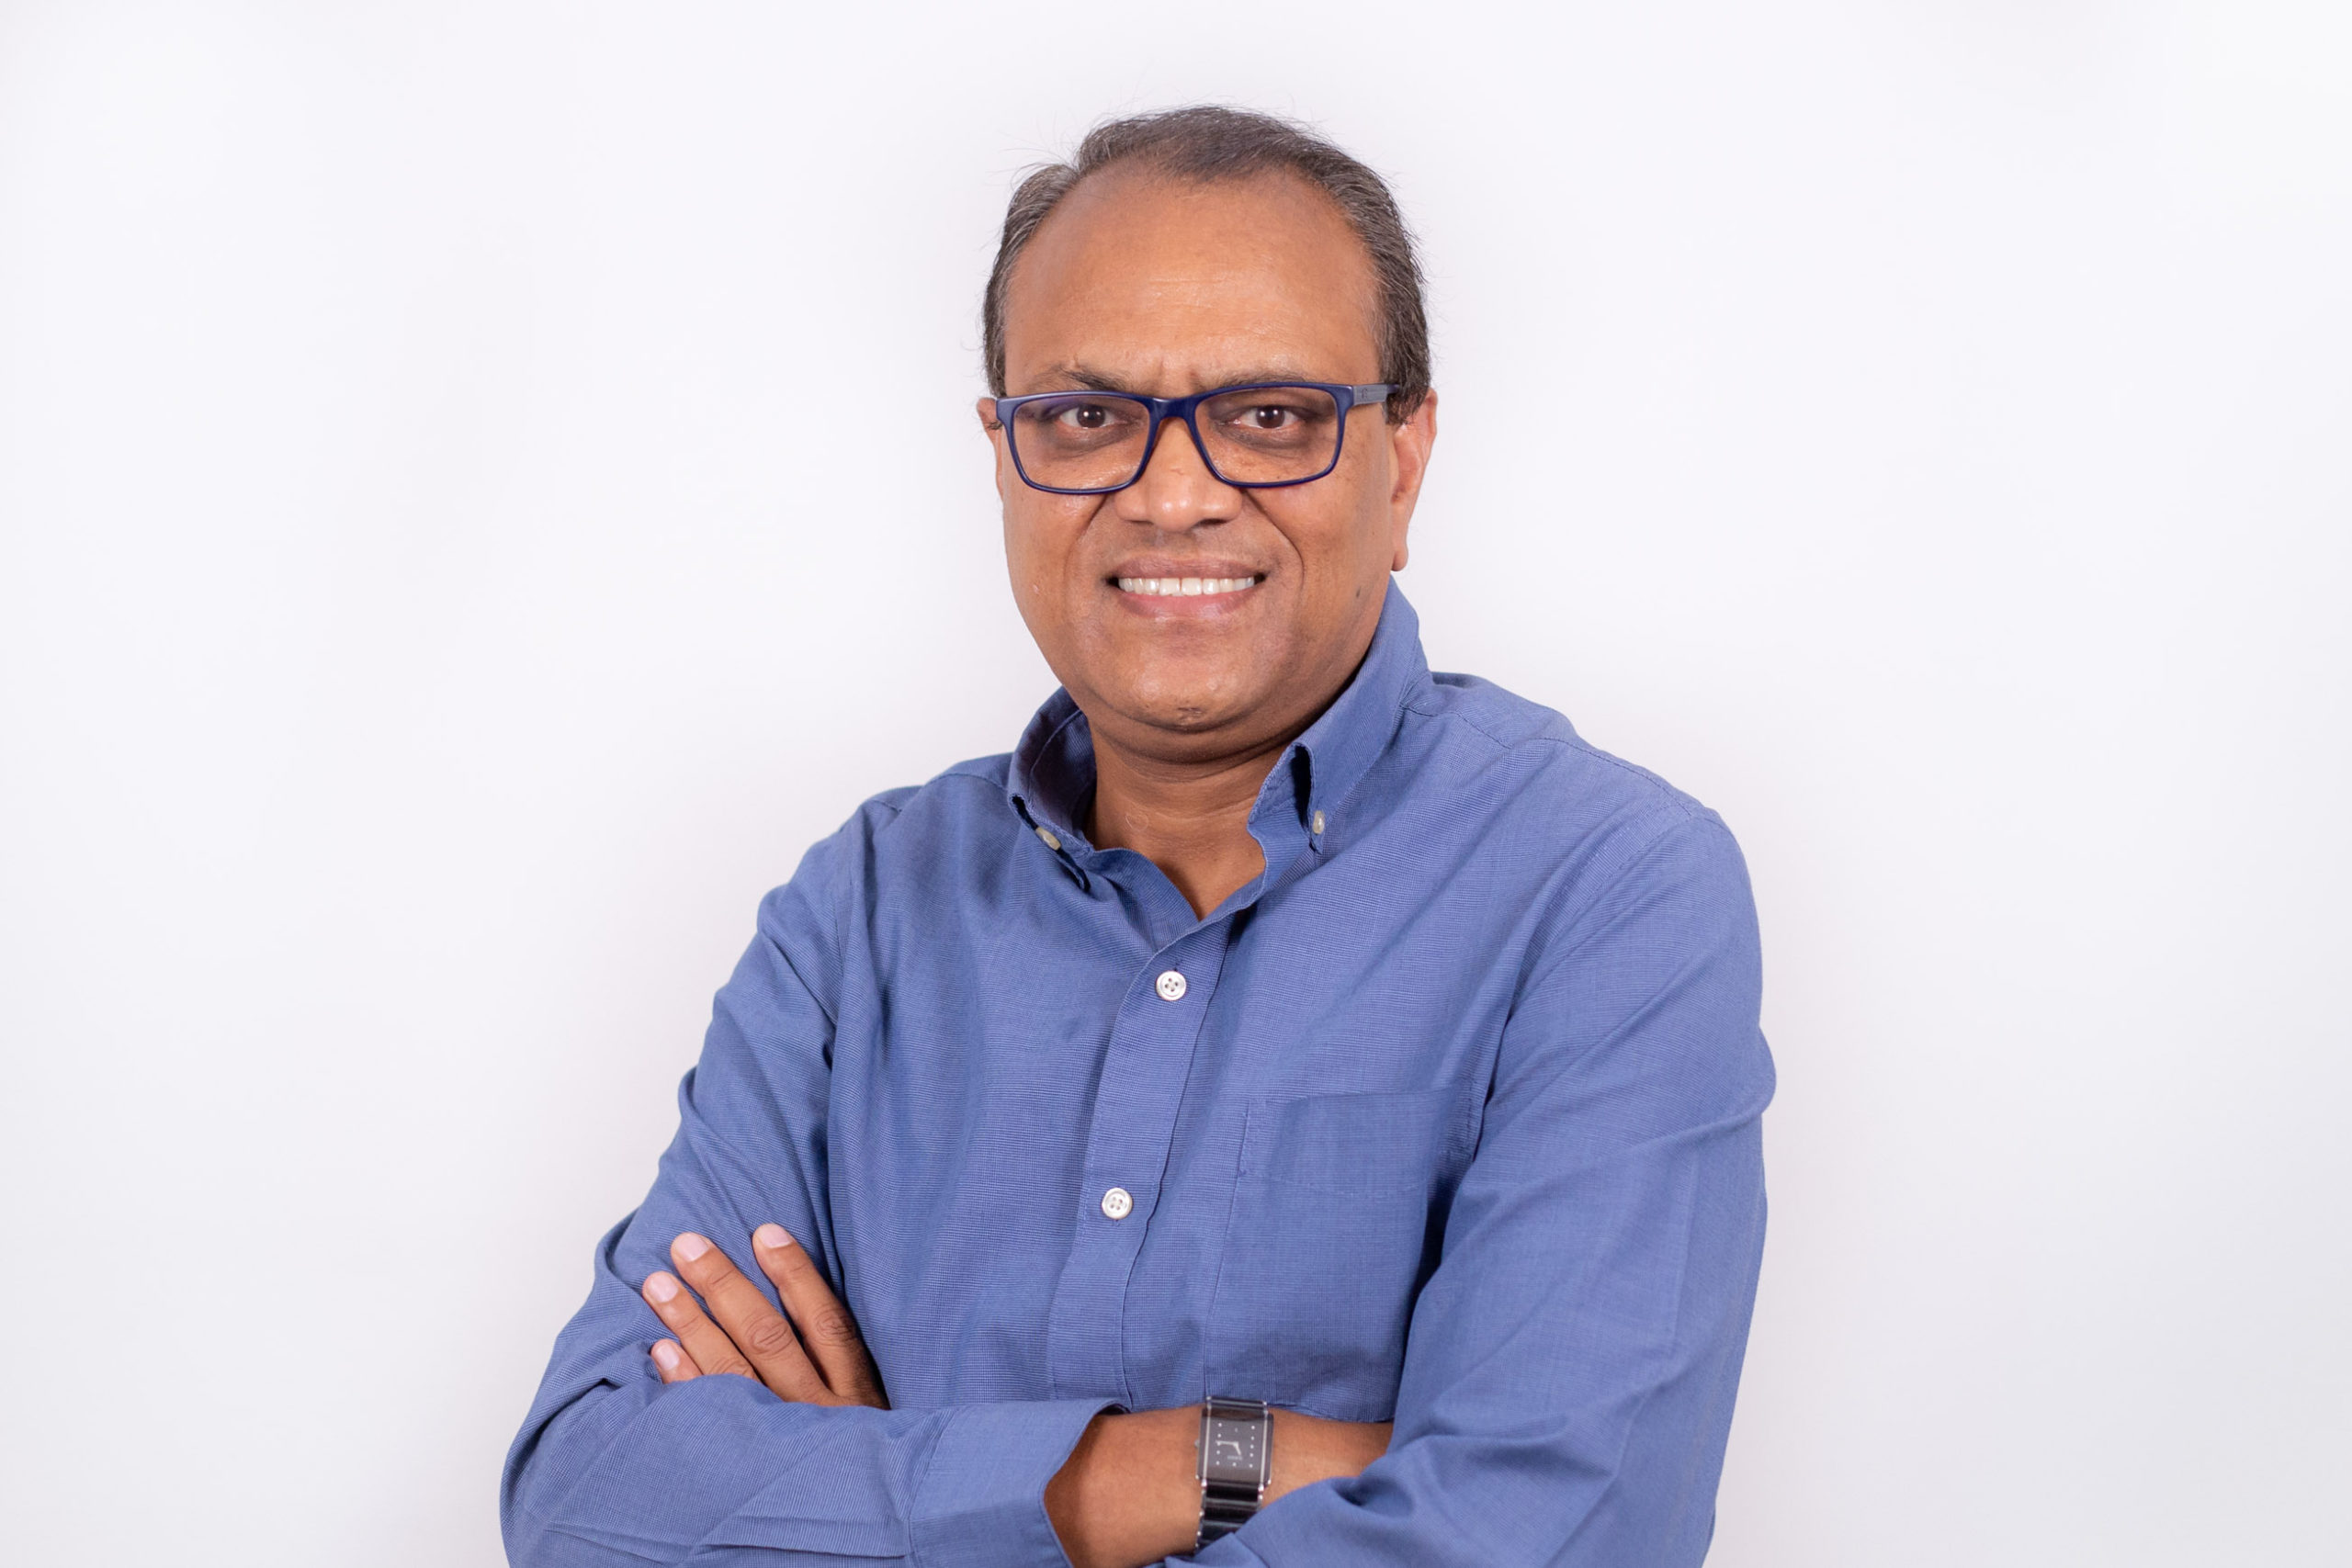 BMM Welcomes Navin Goel to its Executive Team